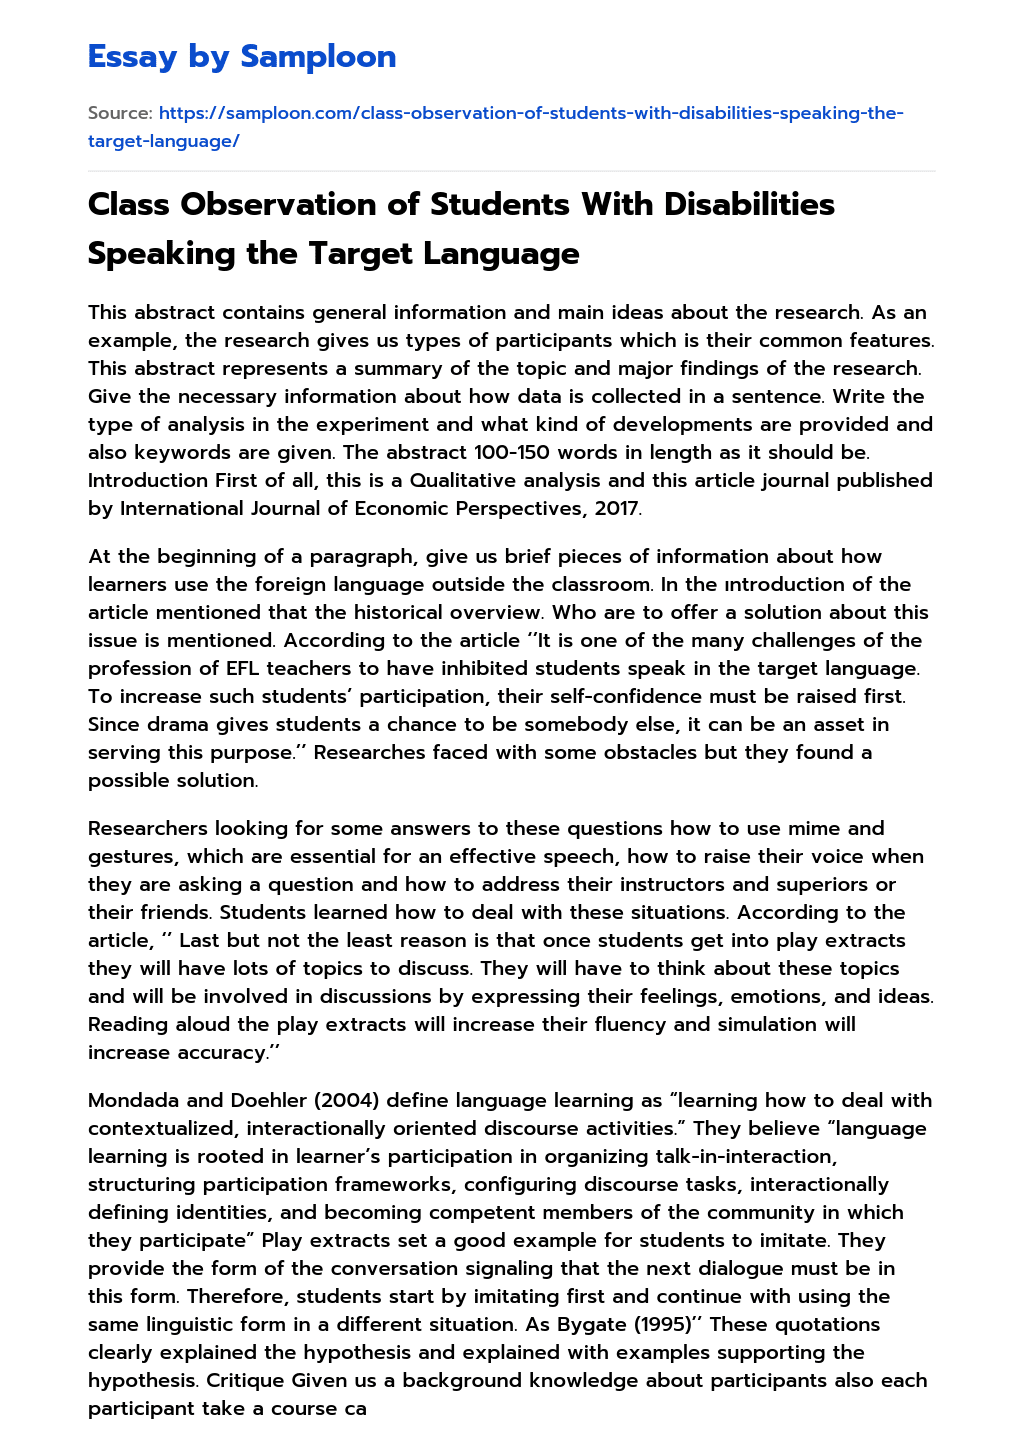 Class Observation of Students With Disabilities Speaking the Target Language essay